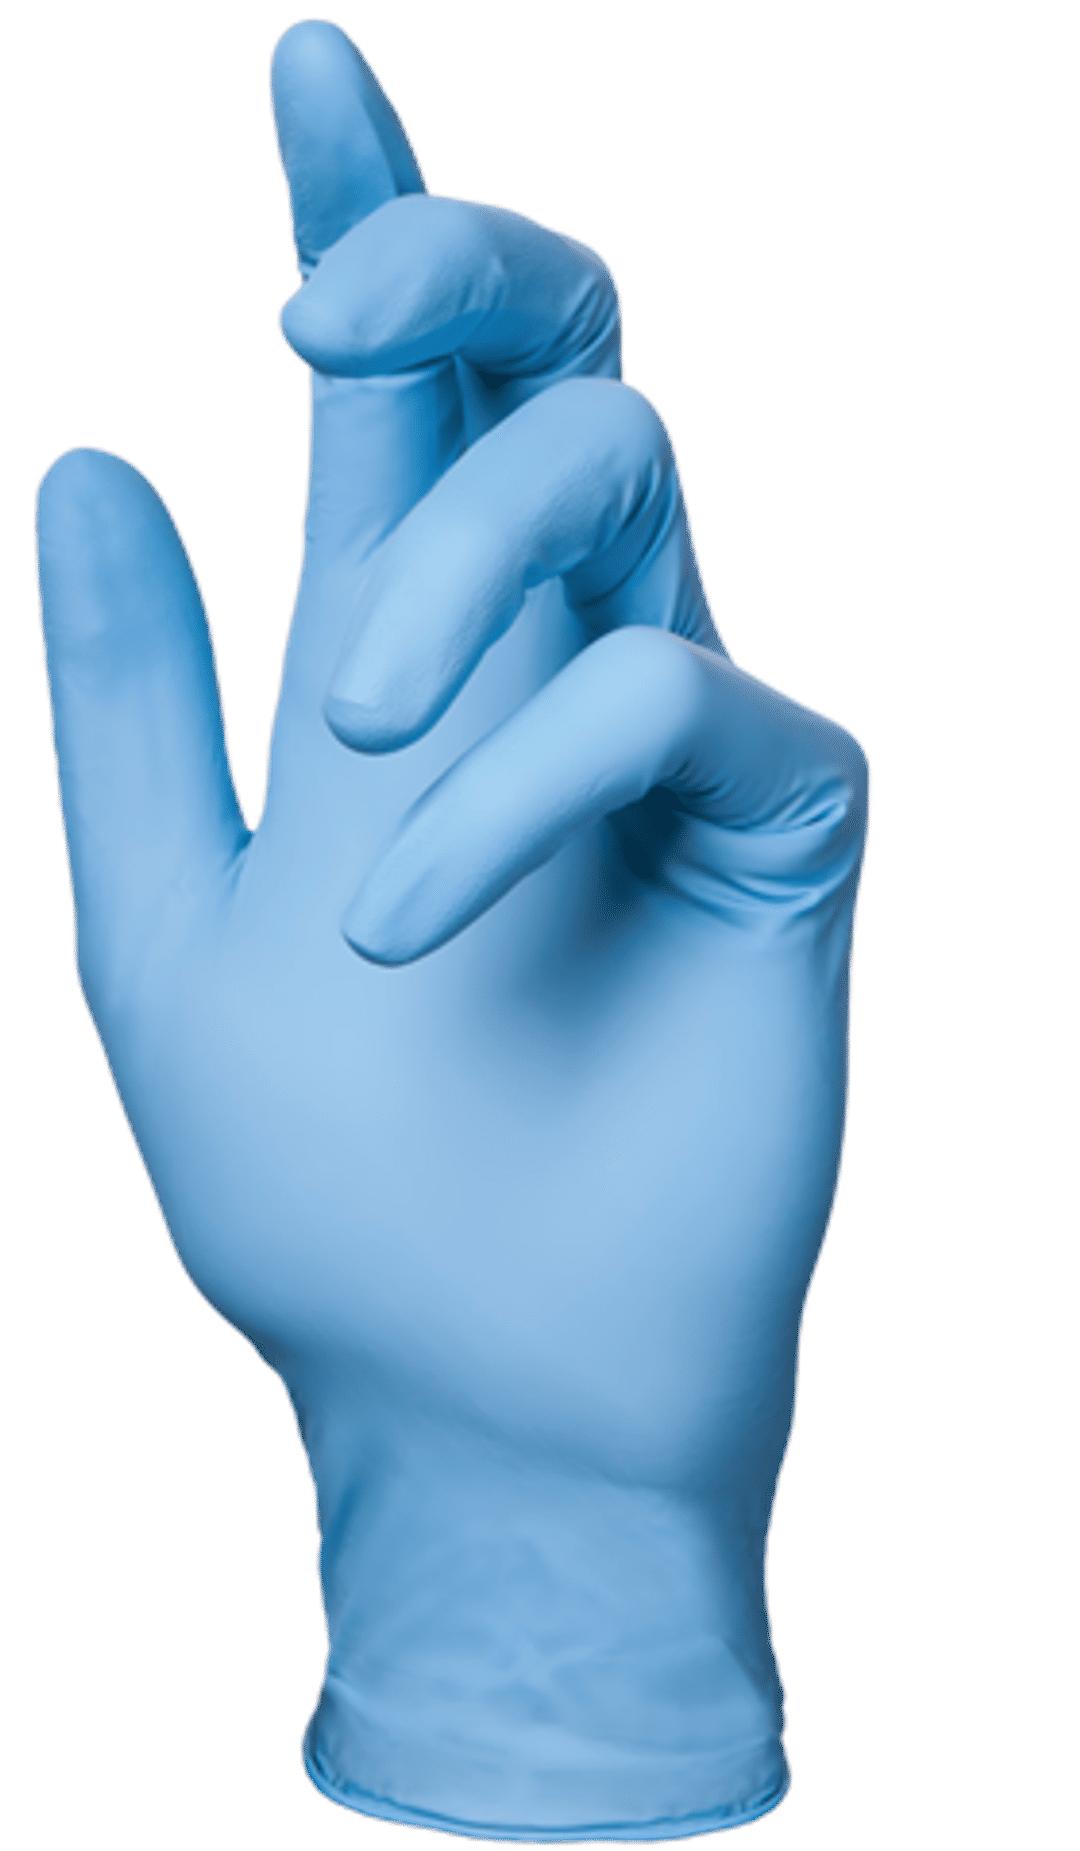 Bromed Nitrile Gloves, Small - Pack of 100